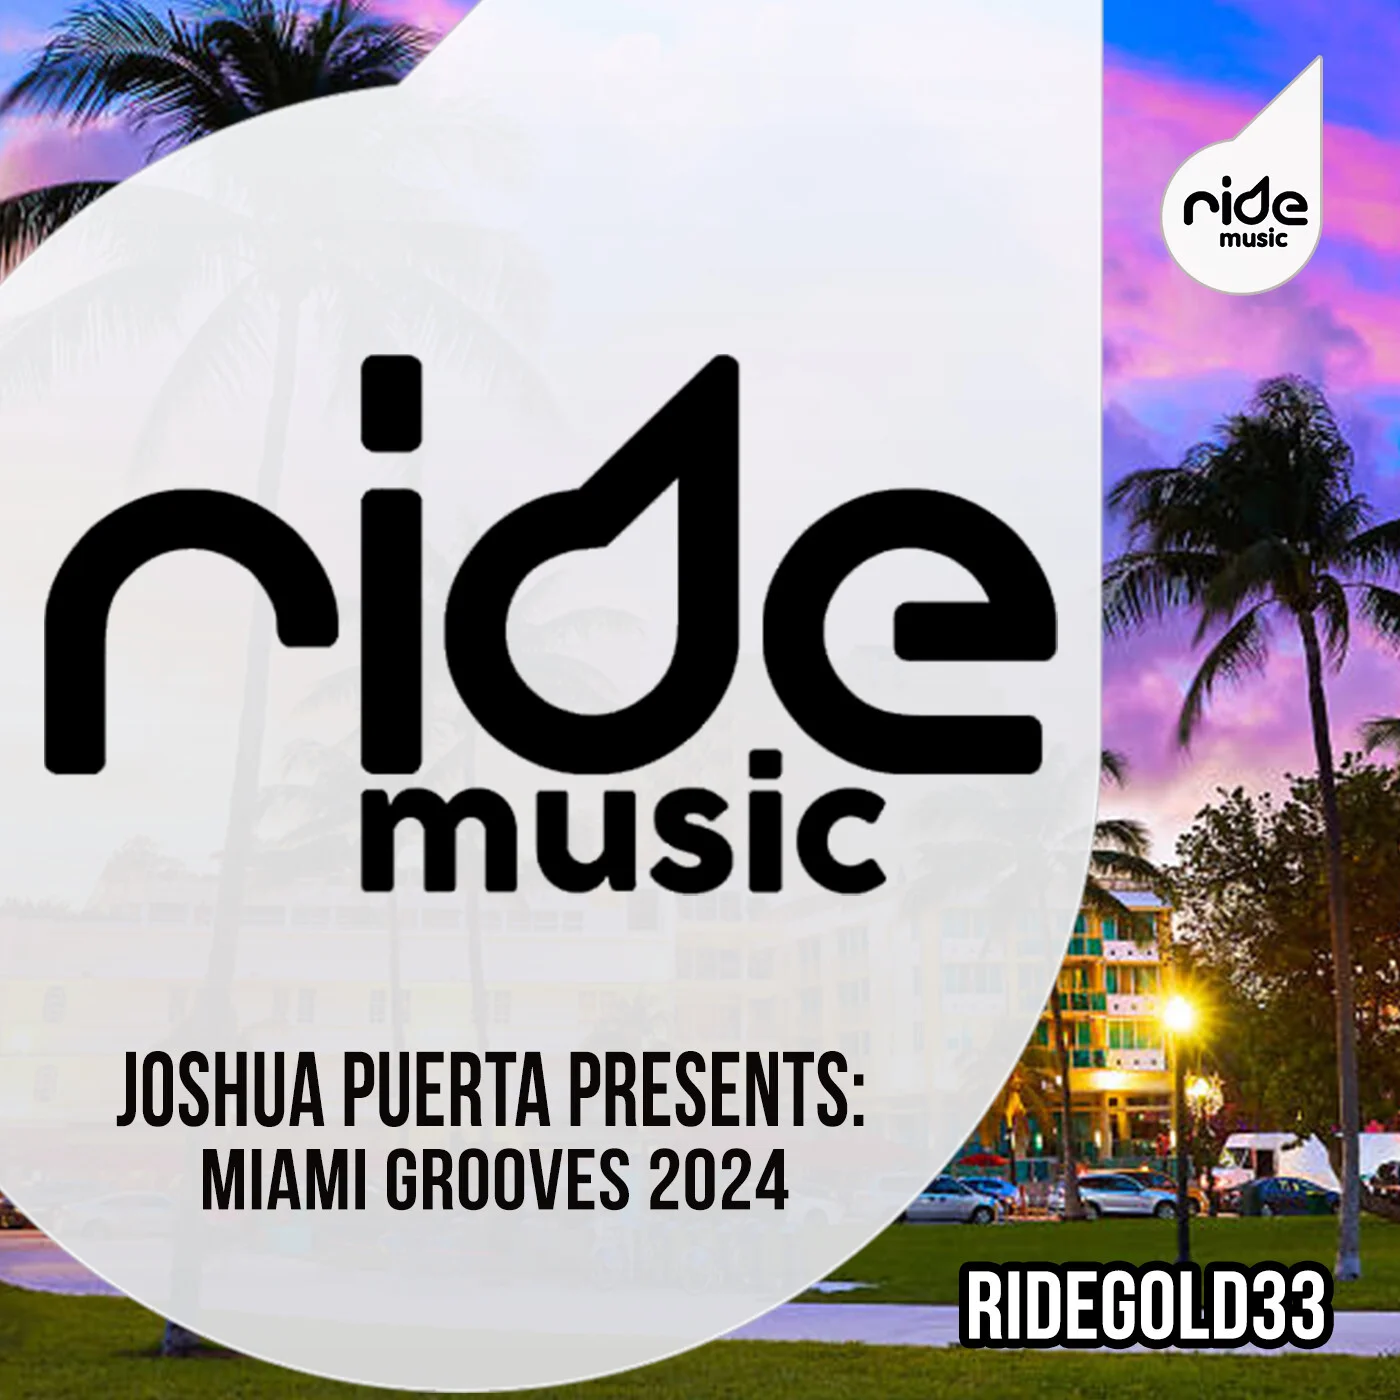 Nicola Baldacci presents his new track on Ride Music's VA compilation for Miami Music Week 2024